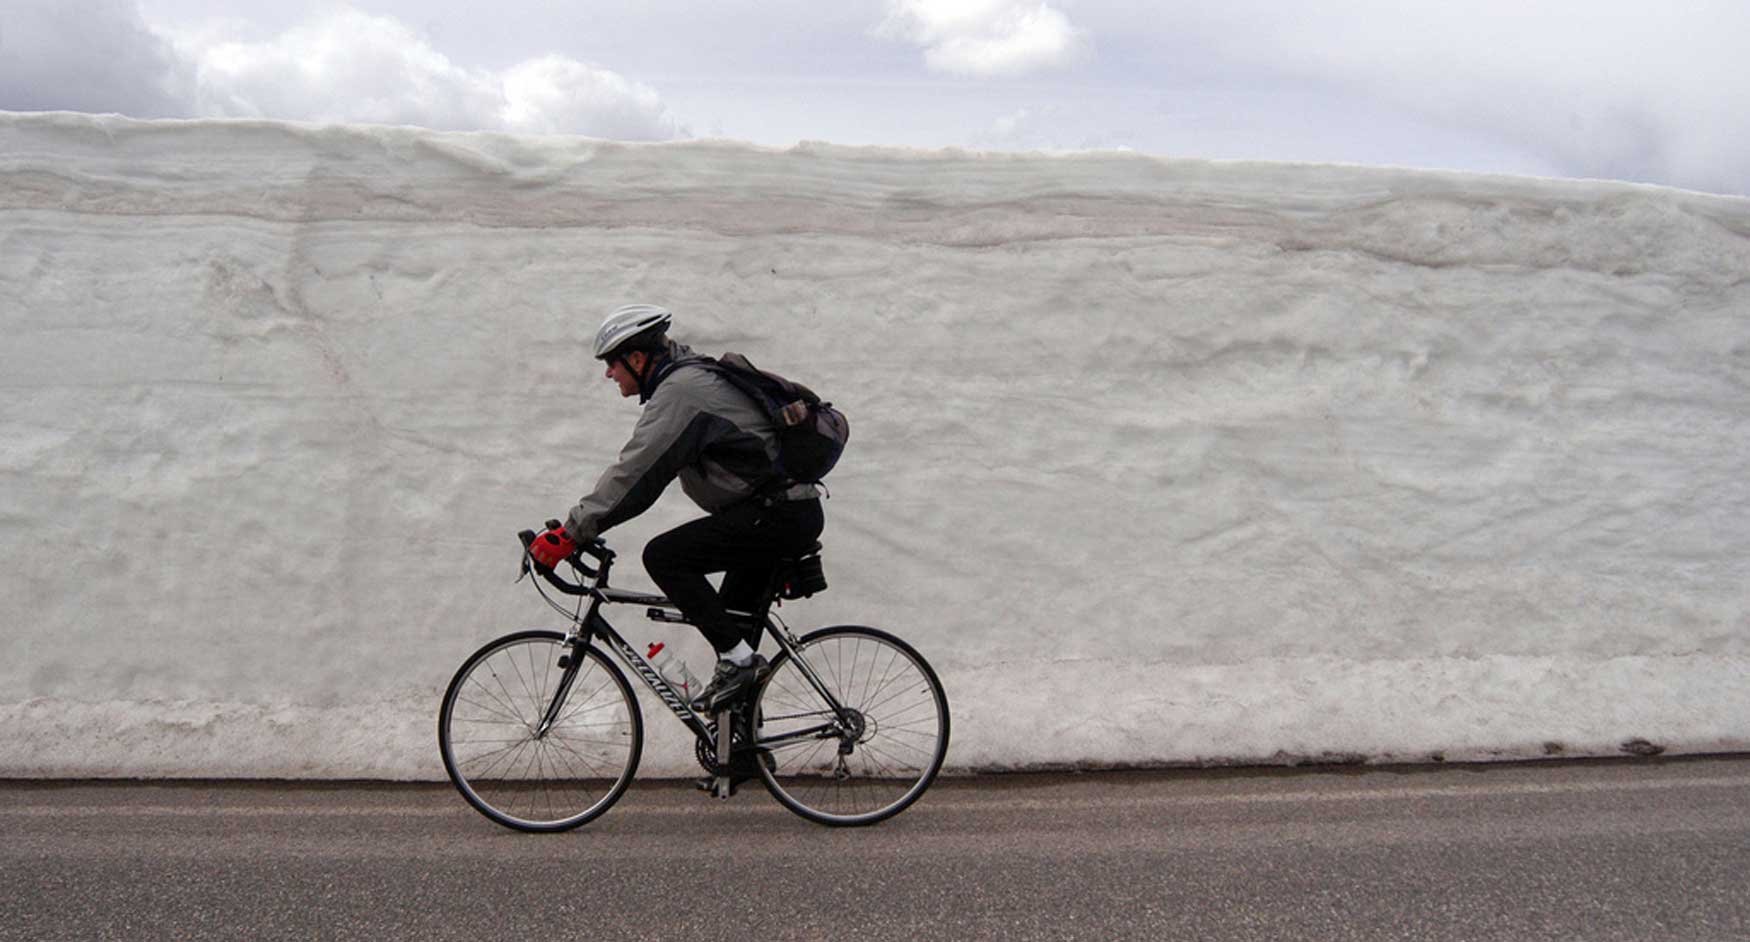 A bicyclist rides past freshly plowed snow along the road between Norris and Canyon Village. (Ruffin Prevost/Yellowstone Gate file photo - click to enlarge)